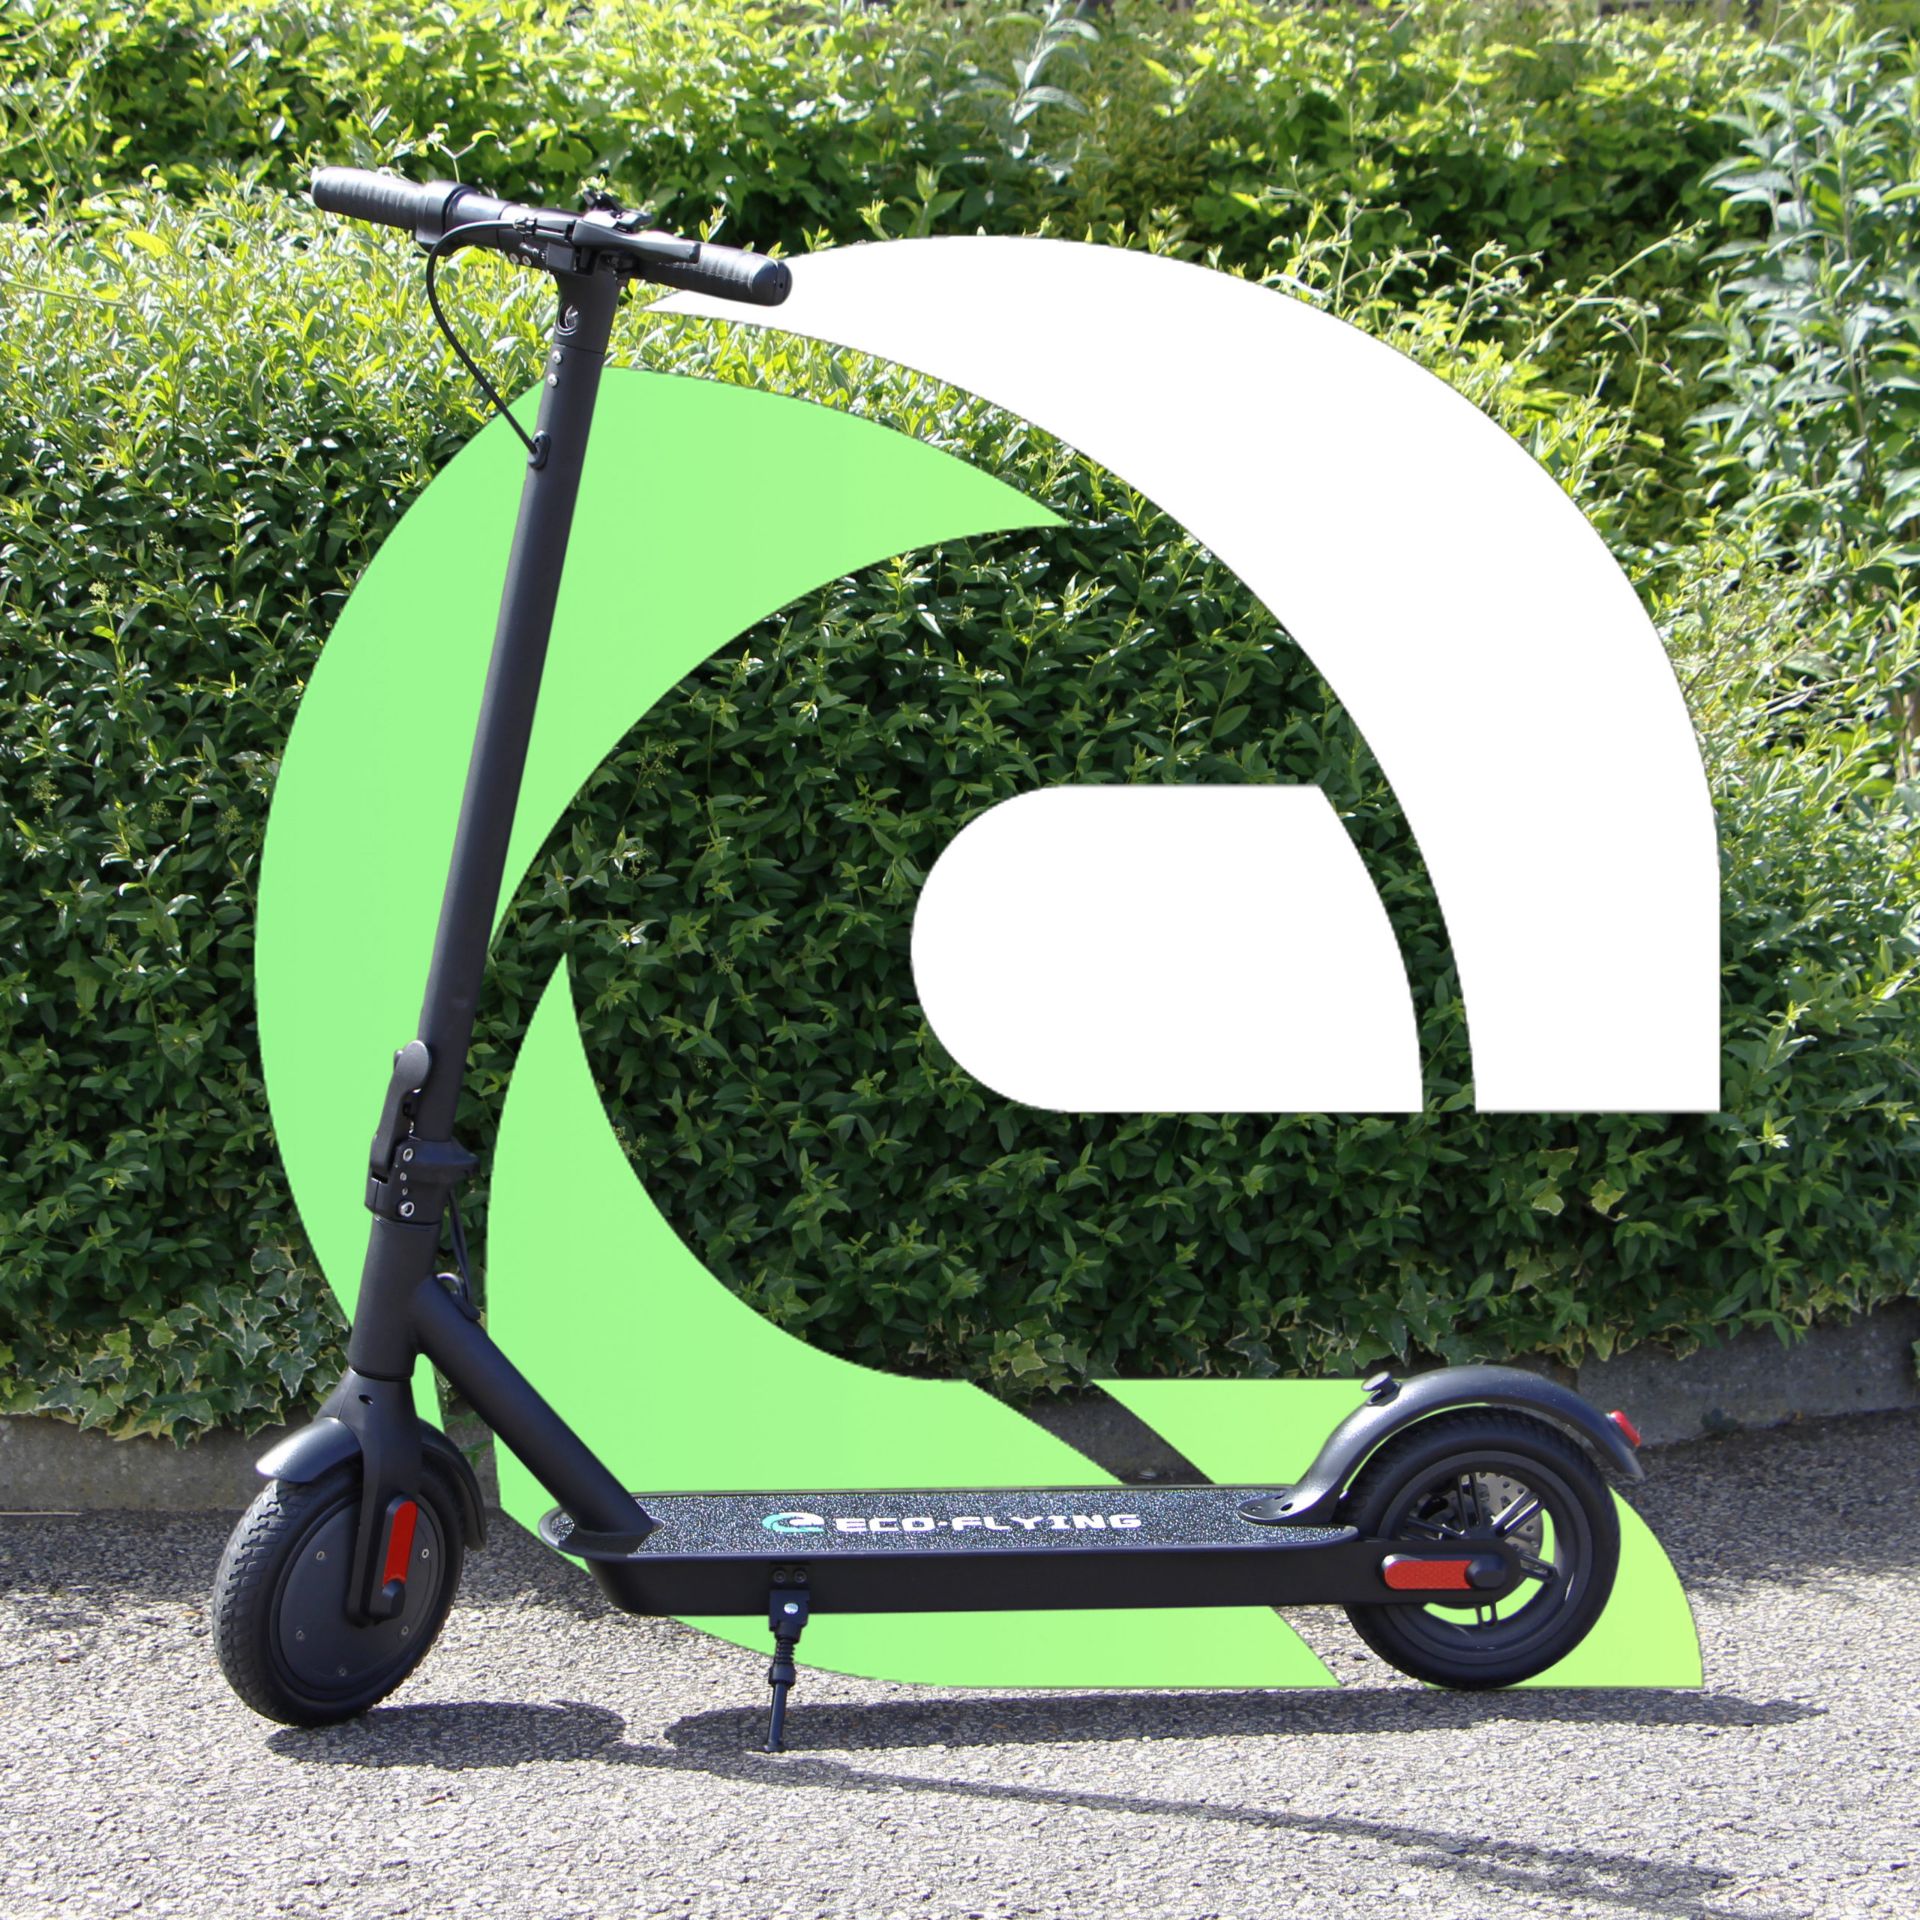 Foldable smart scooter x4 - Image 5 of 5